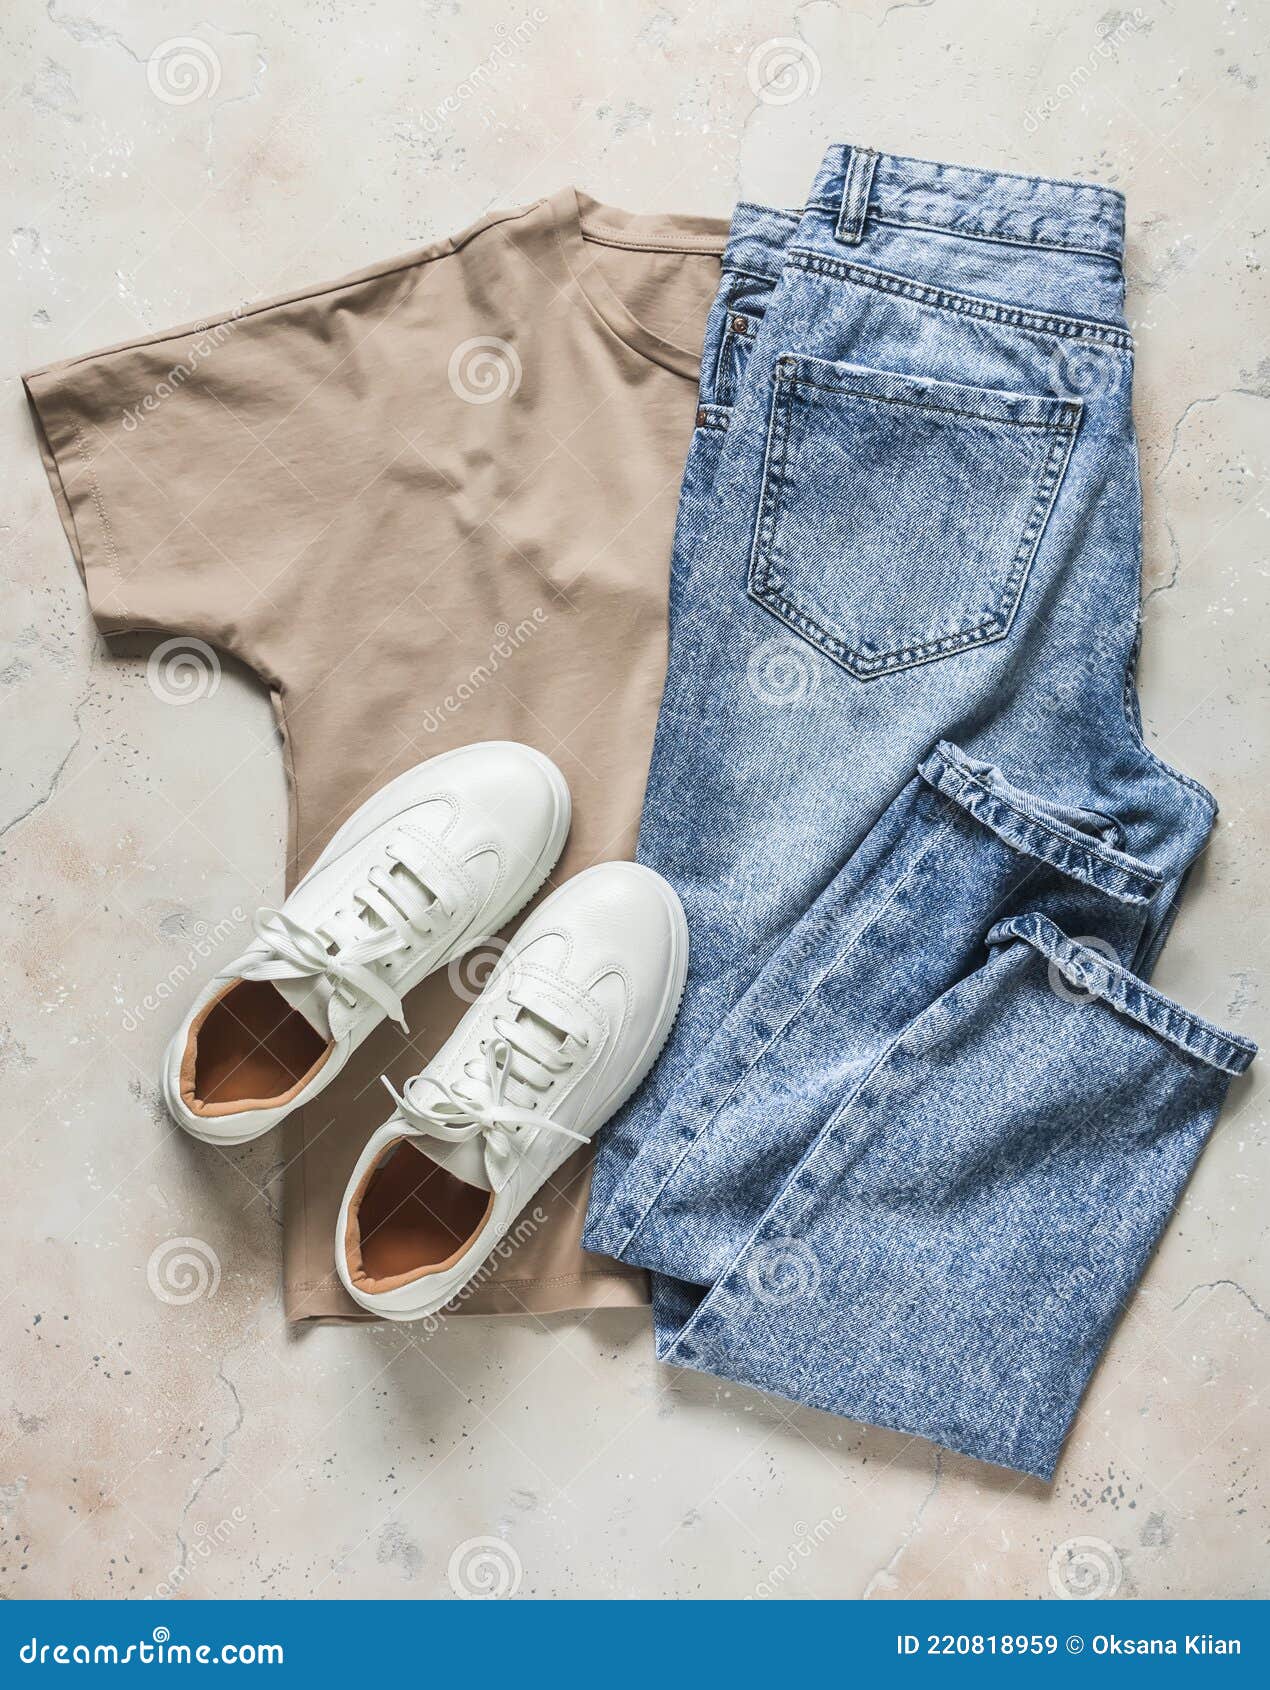 Women`s Casual Walking Wear - Comfortable Leather Sneakers, Beige T-shirt  and Blue Jeans on a Light Background, Top View Stock Image - Image of pair,  fabric: 220818959